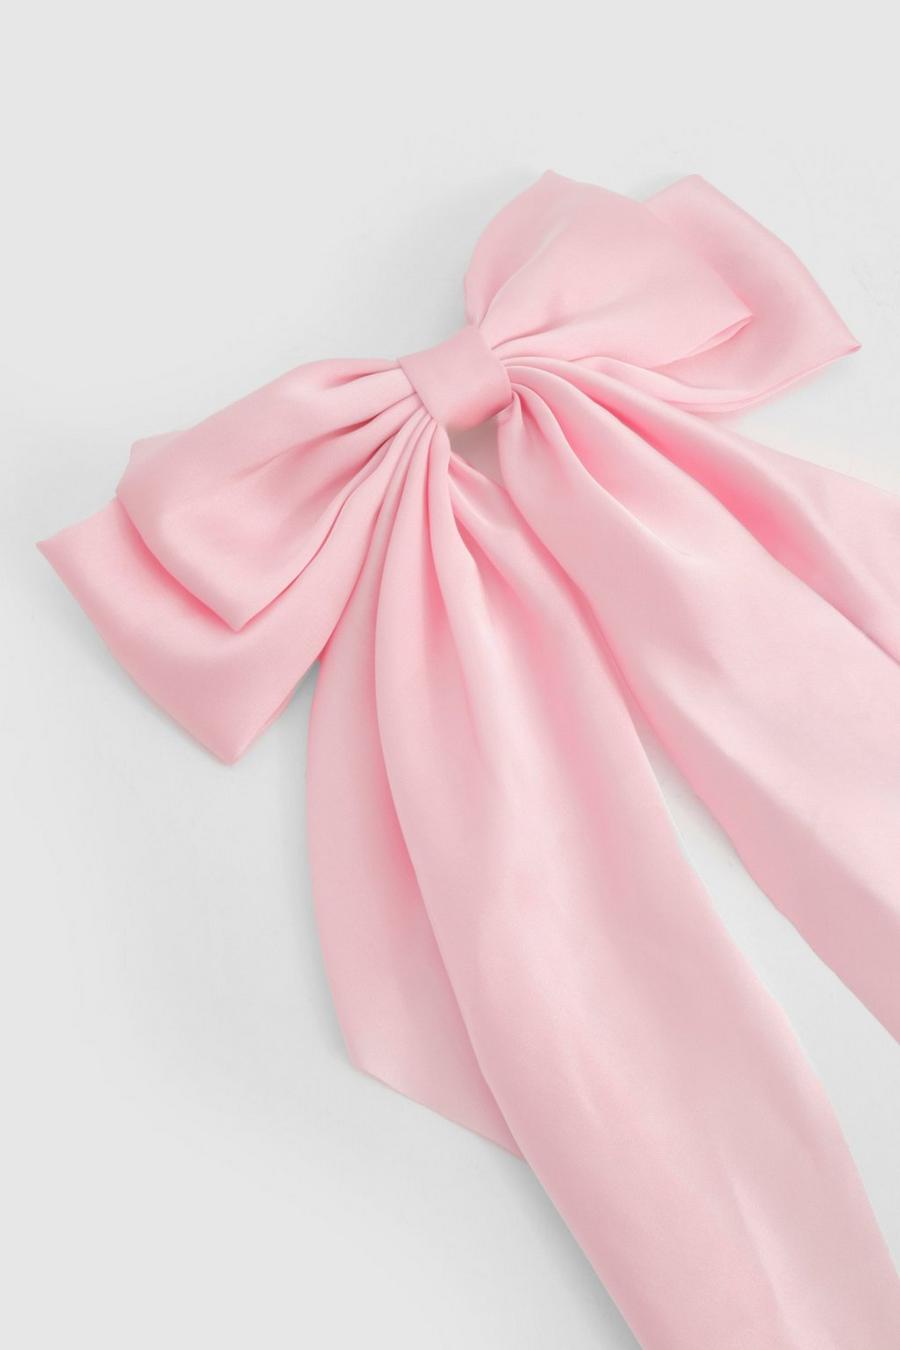 Oversized Baby Pink Satin Bow Hair Clip